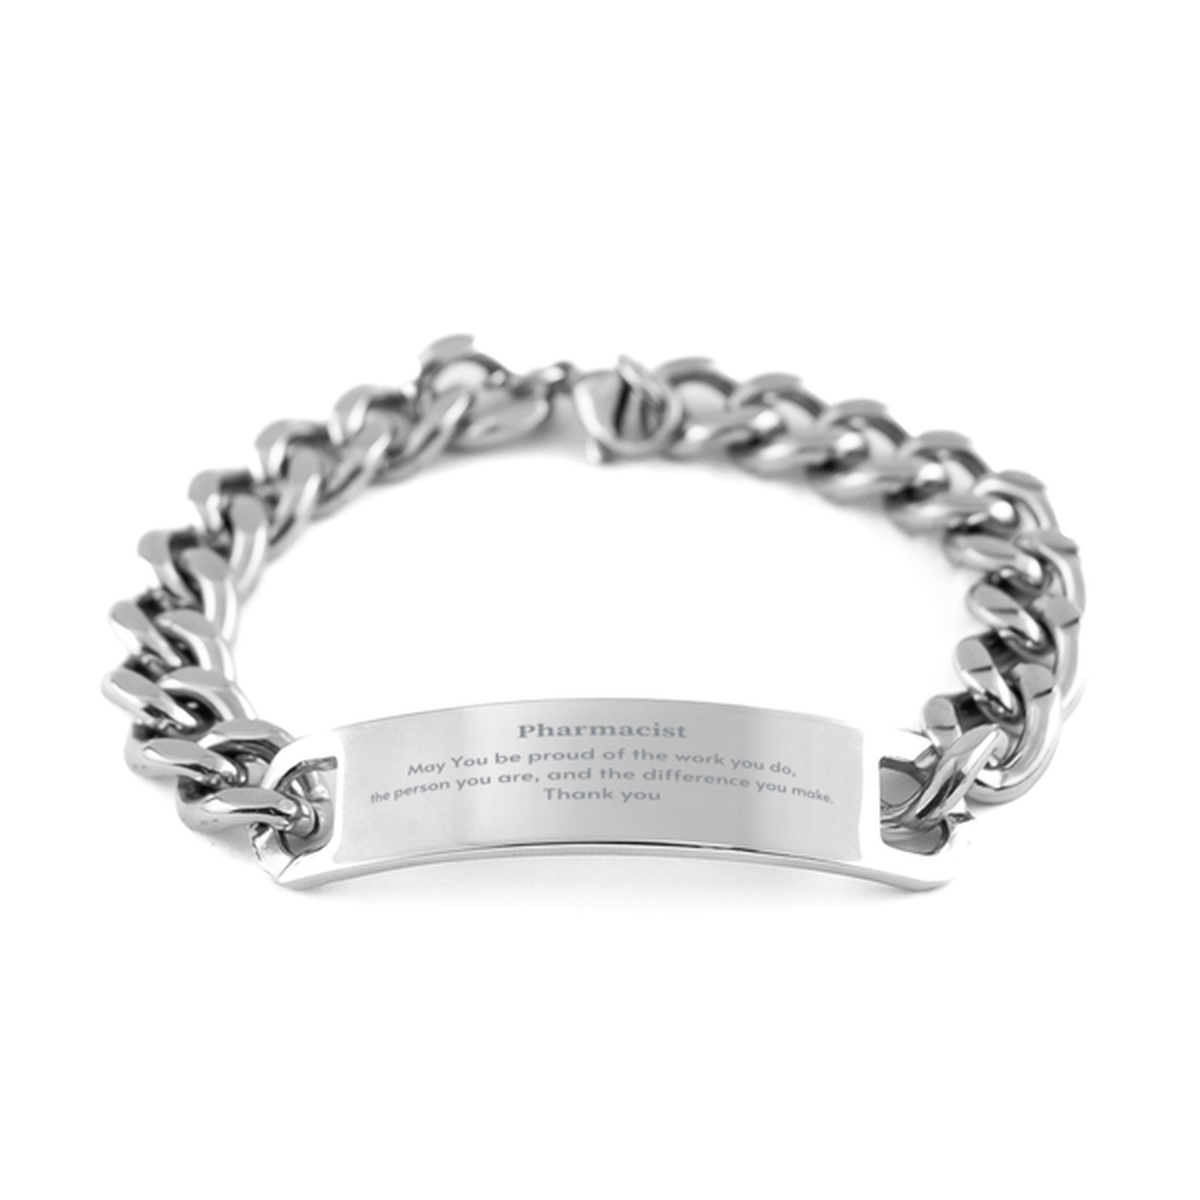 Heartwarming Cuban Chain Stainless Steel Bracelet Retirement Coworkers Gifts for Pharmacist, Pharmacist May You be proud of the work you do, the person you are Gifts for Boss Men Women Friends